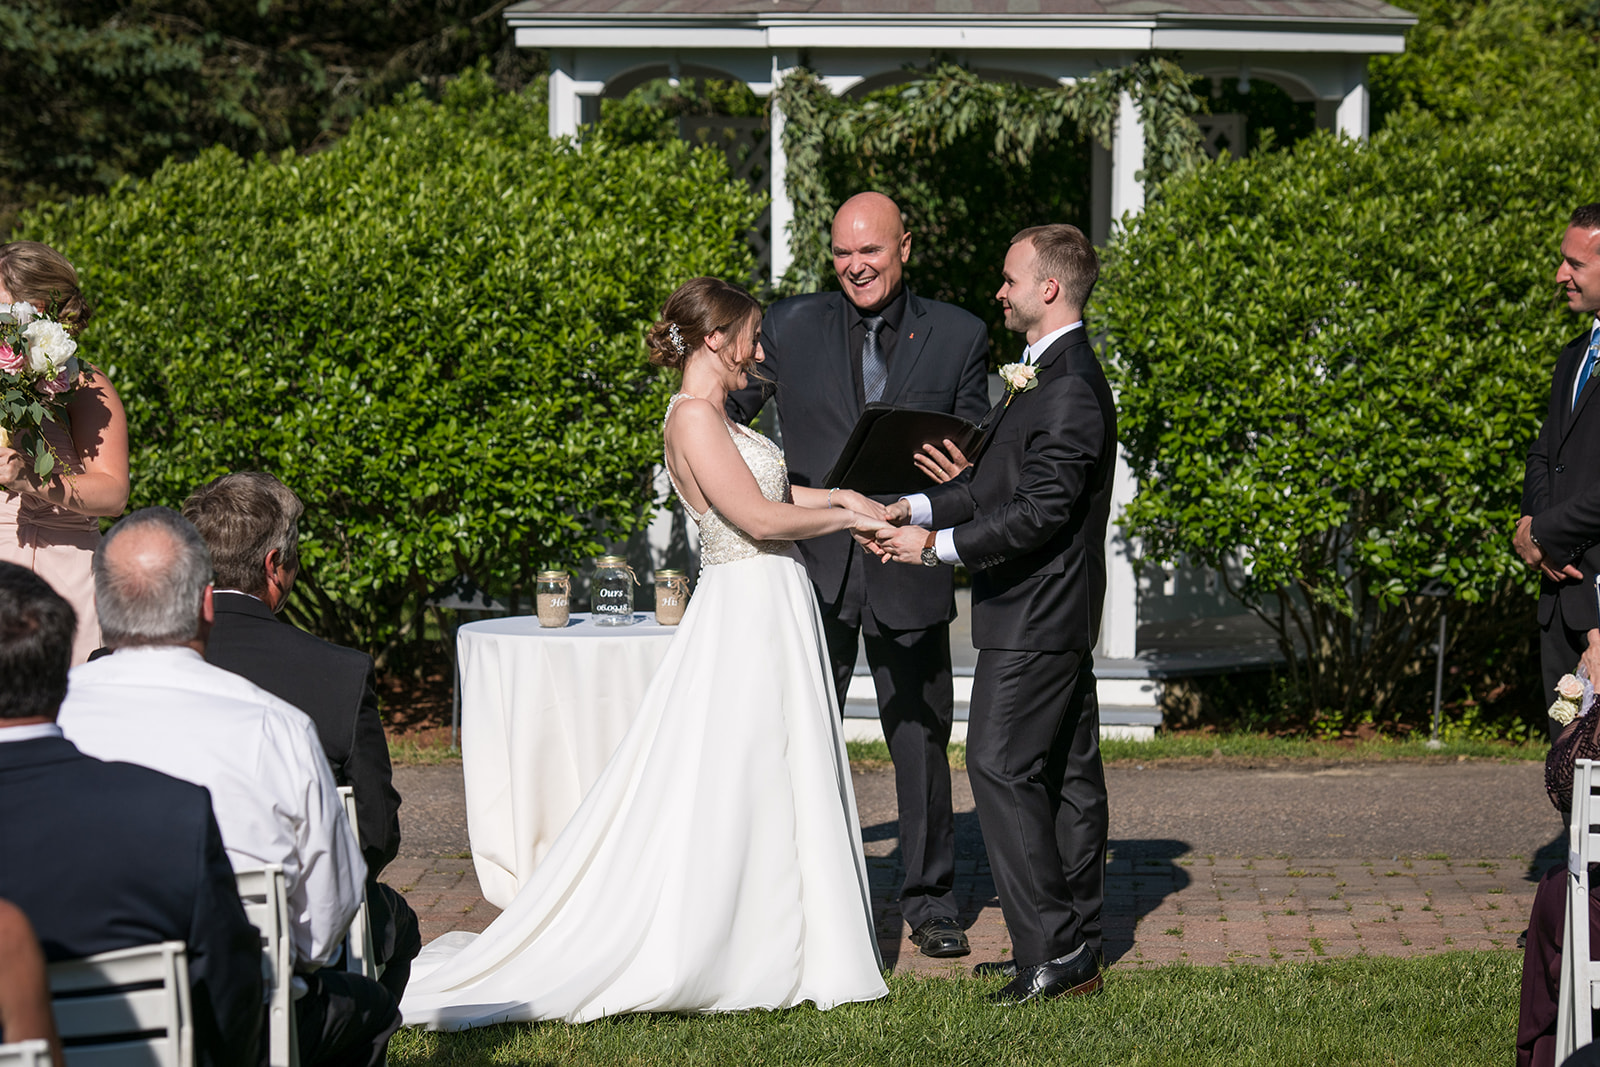 Greg Trulson, Justice of the Peace, Vermont Wedding Officiant, Elopements, The Essex